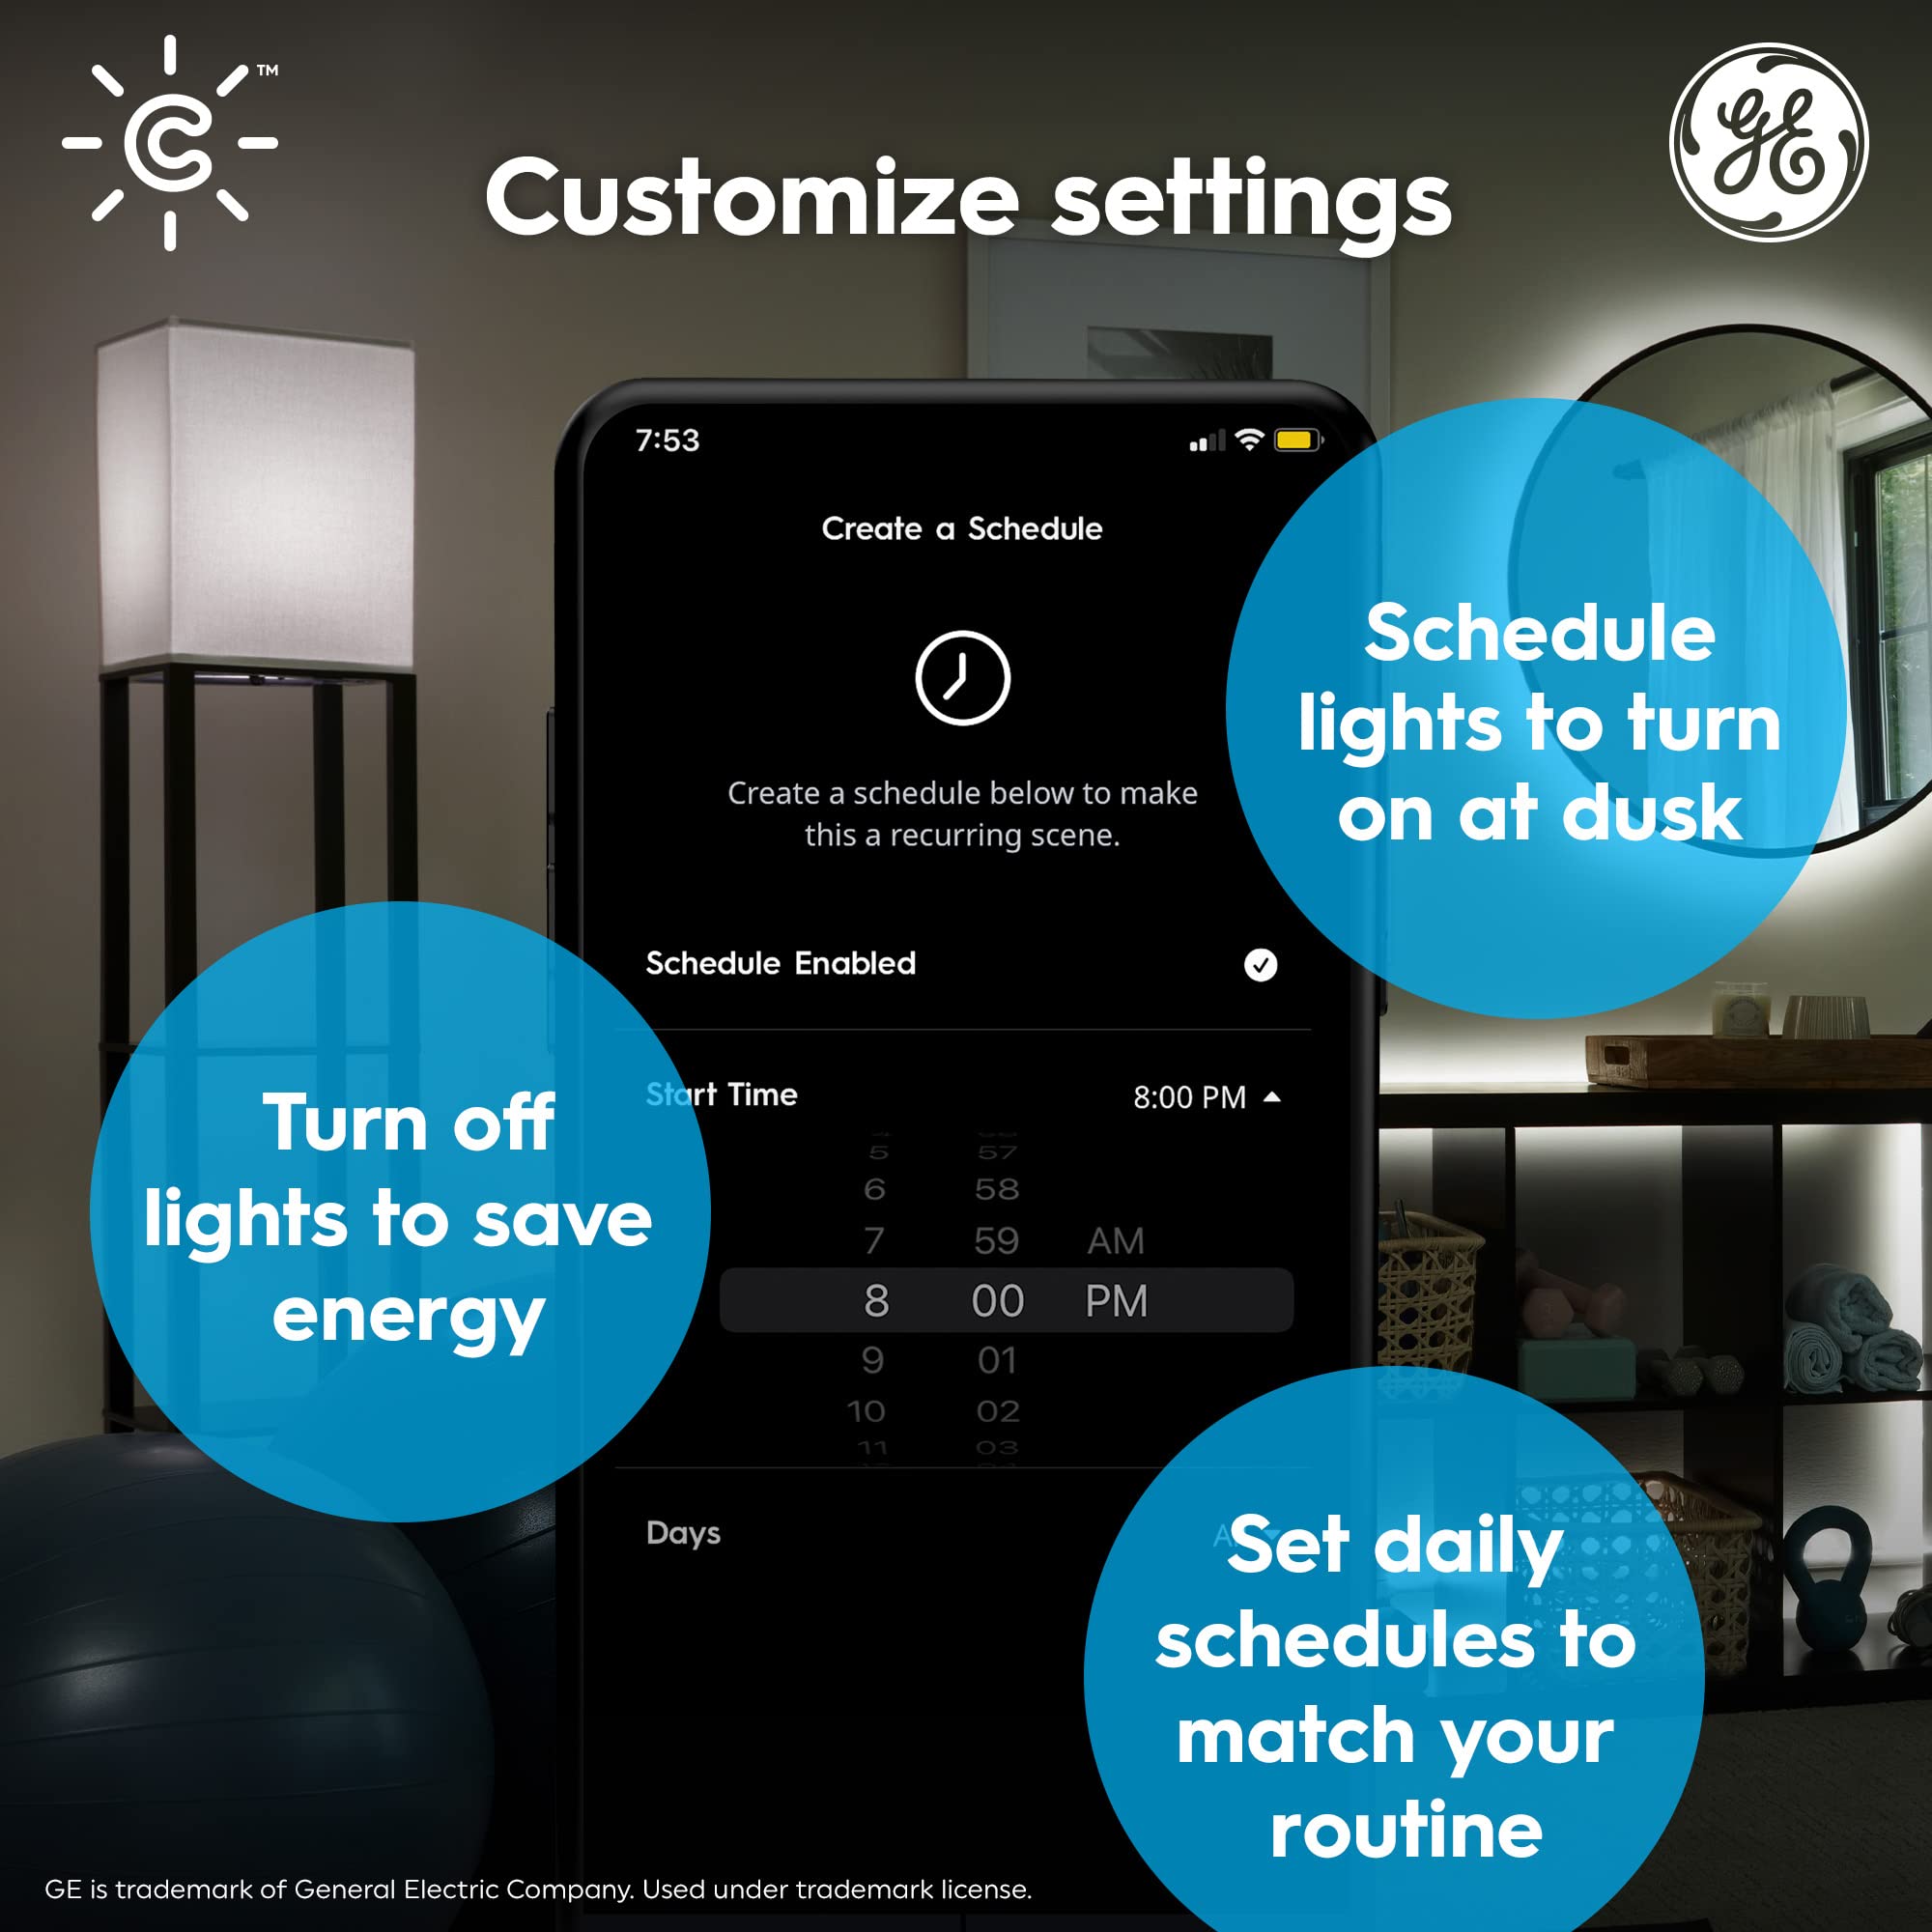 GE Lighting CYNC Smart LED Light Bulbs, White Tones, Bluetooth and Wi-Fi Lights, Works with Alexa and Google Home, BR30 Indoor Floodlight Bulbs (Pack of 2)65 watts